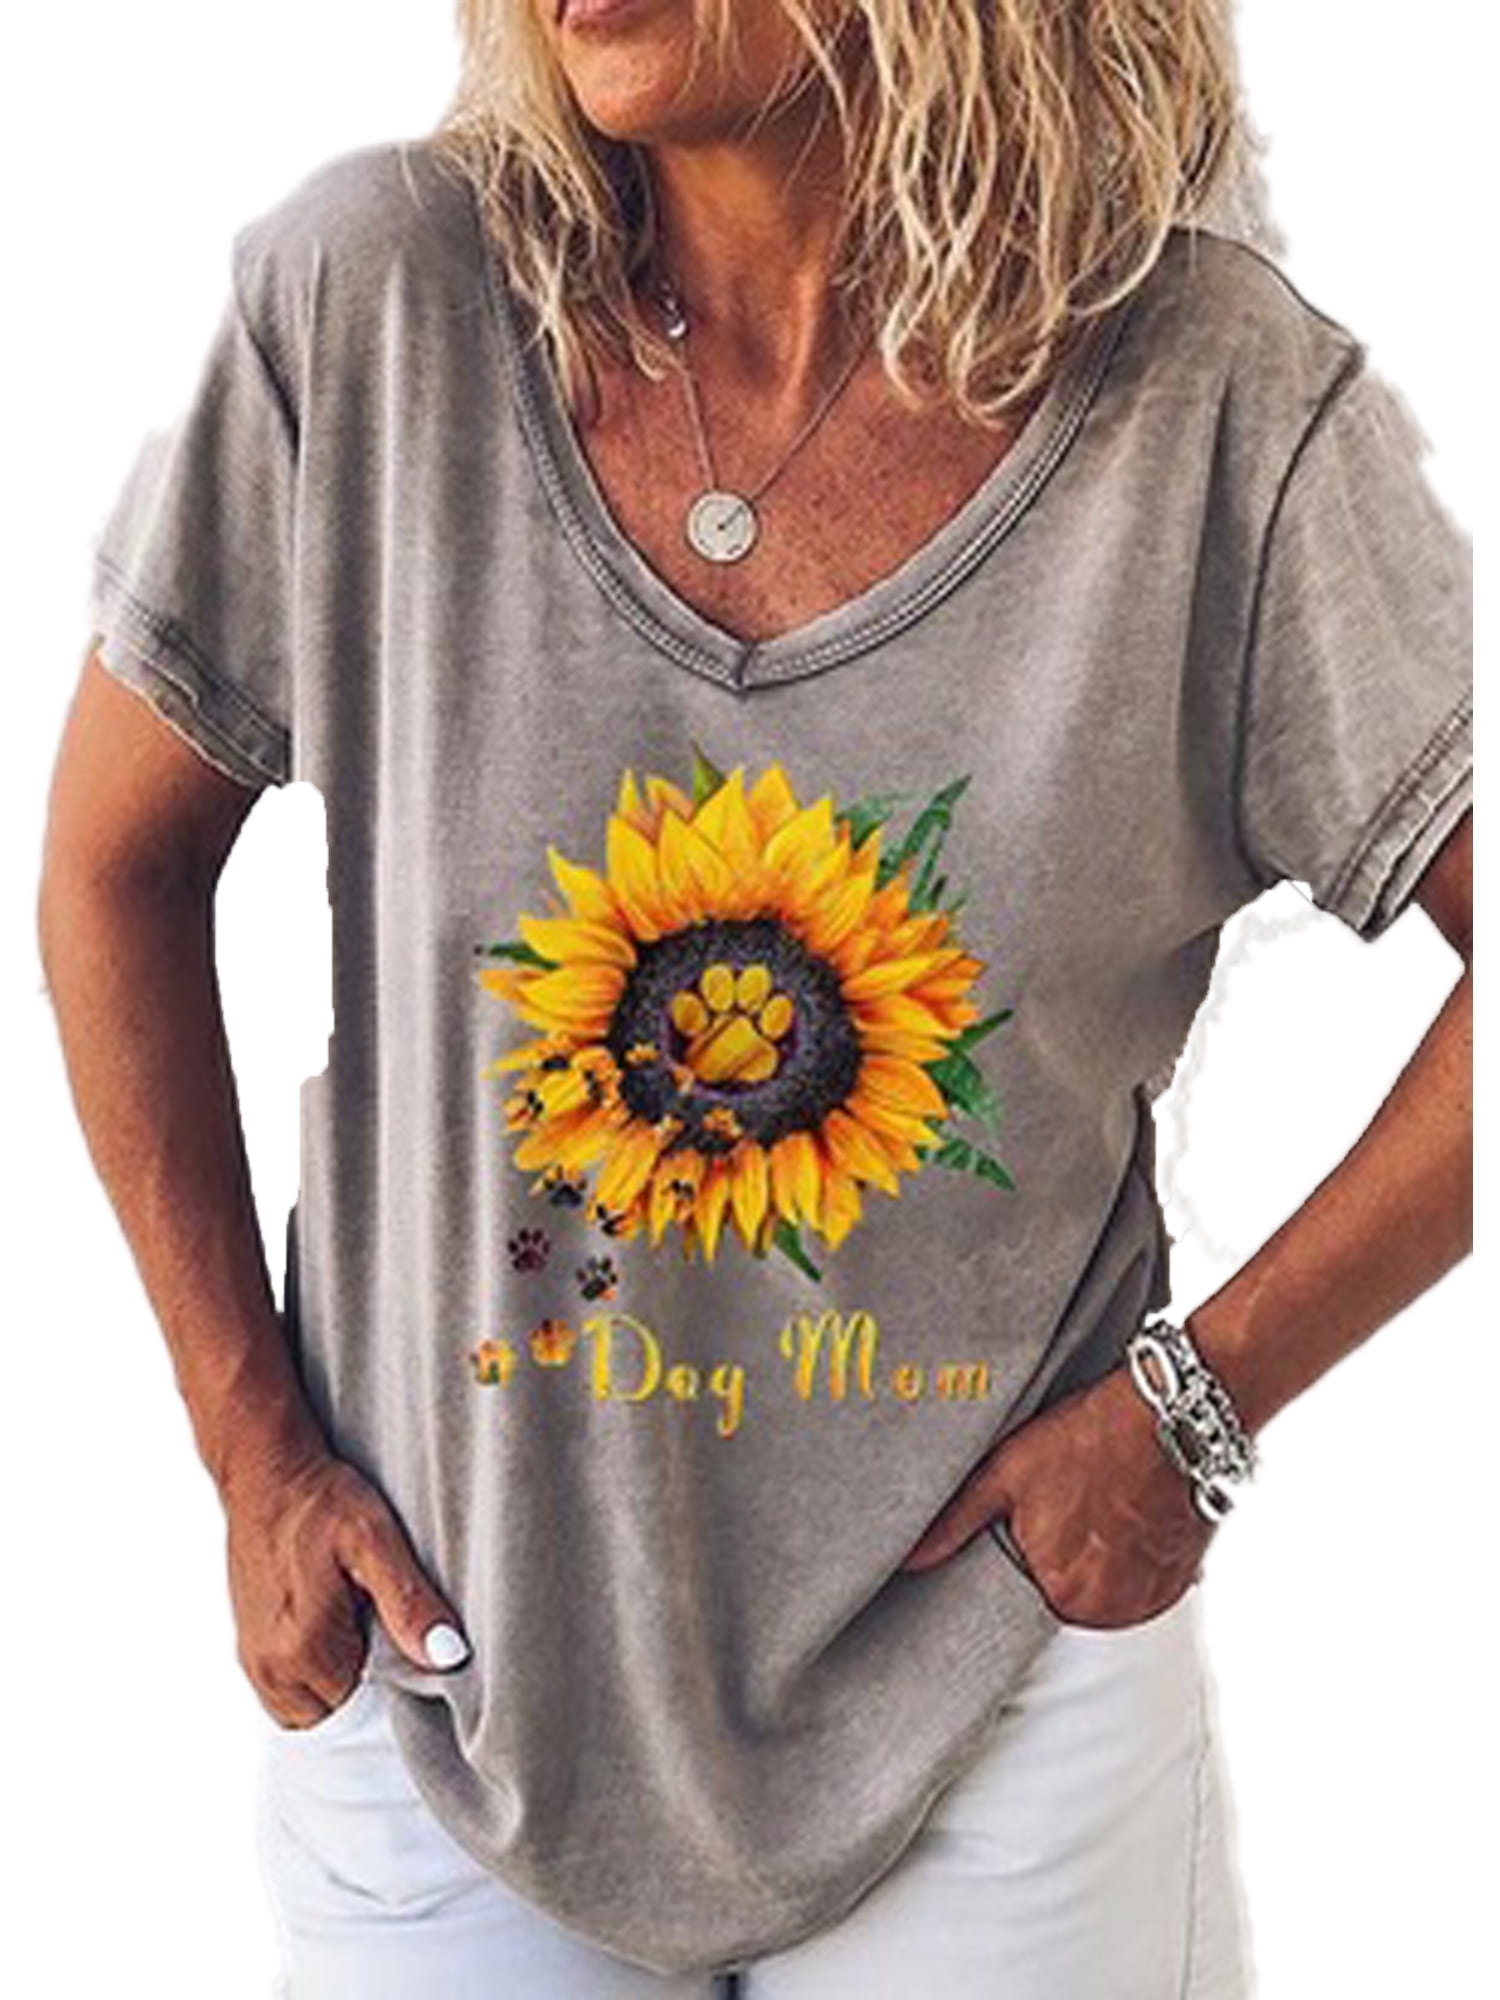 Vedolay Womens Tops Short Sleeve Women Sunflower Print Casual Short Sleeved T-Shirt Plus Size Blouse Top